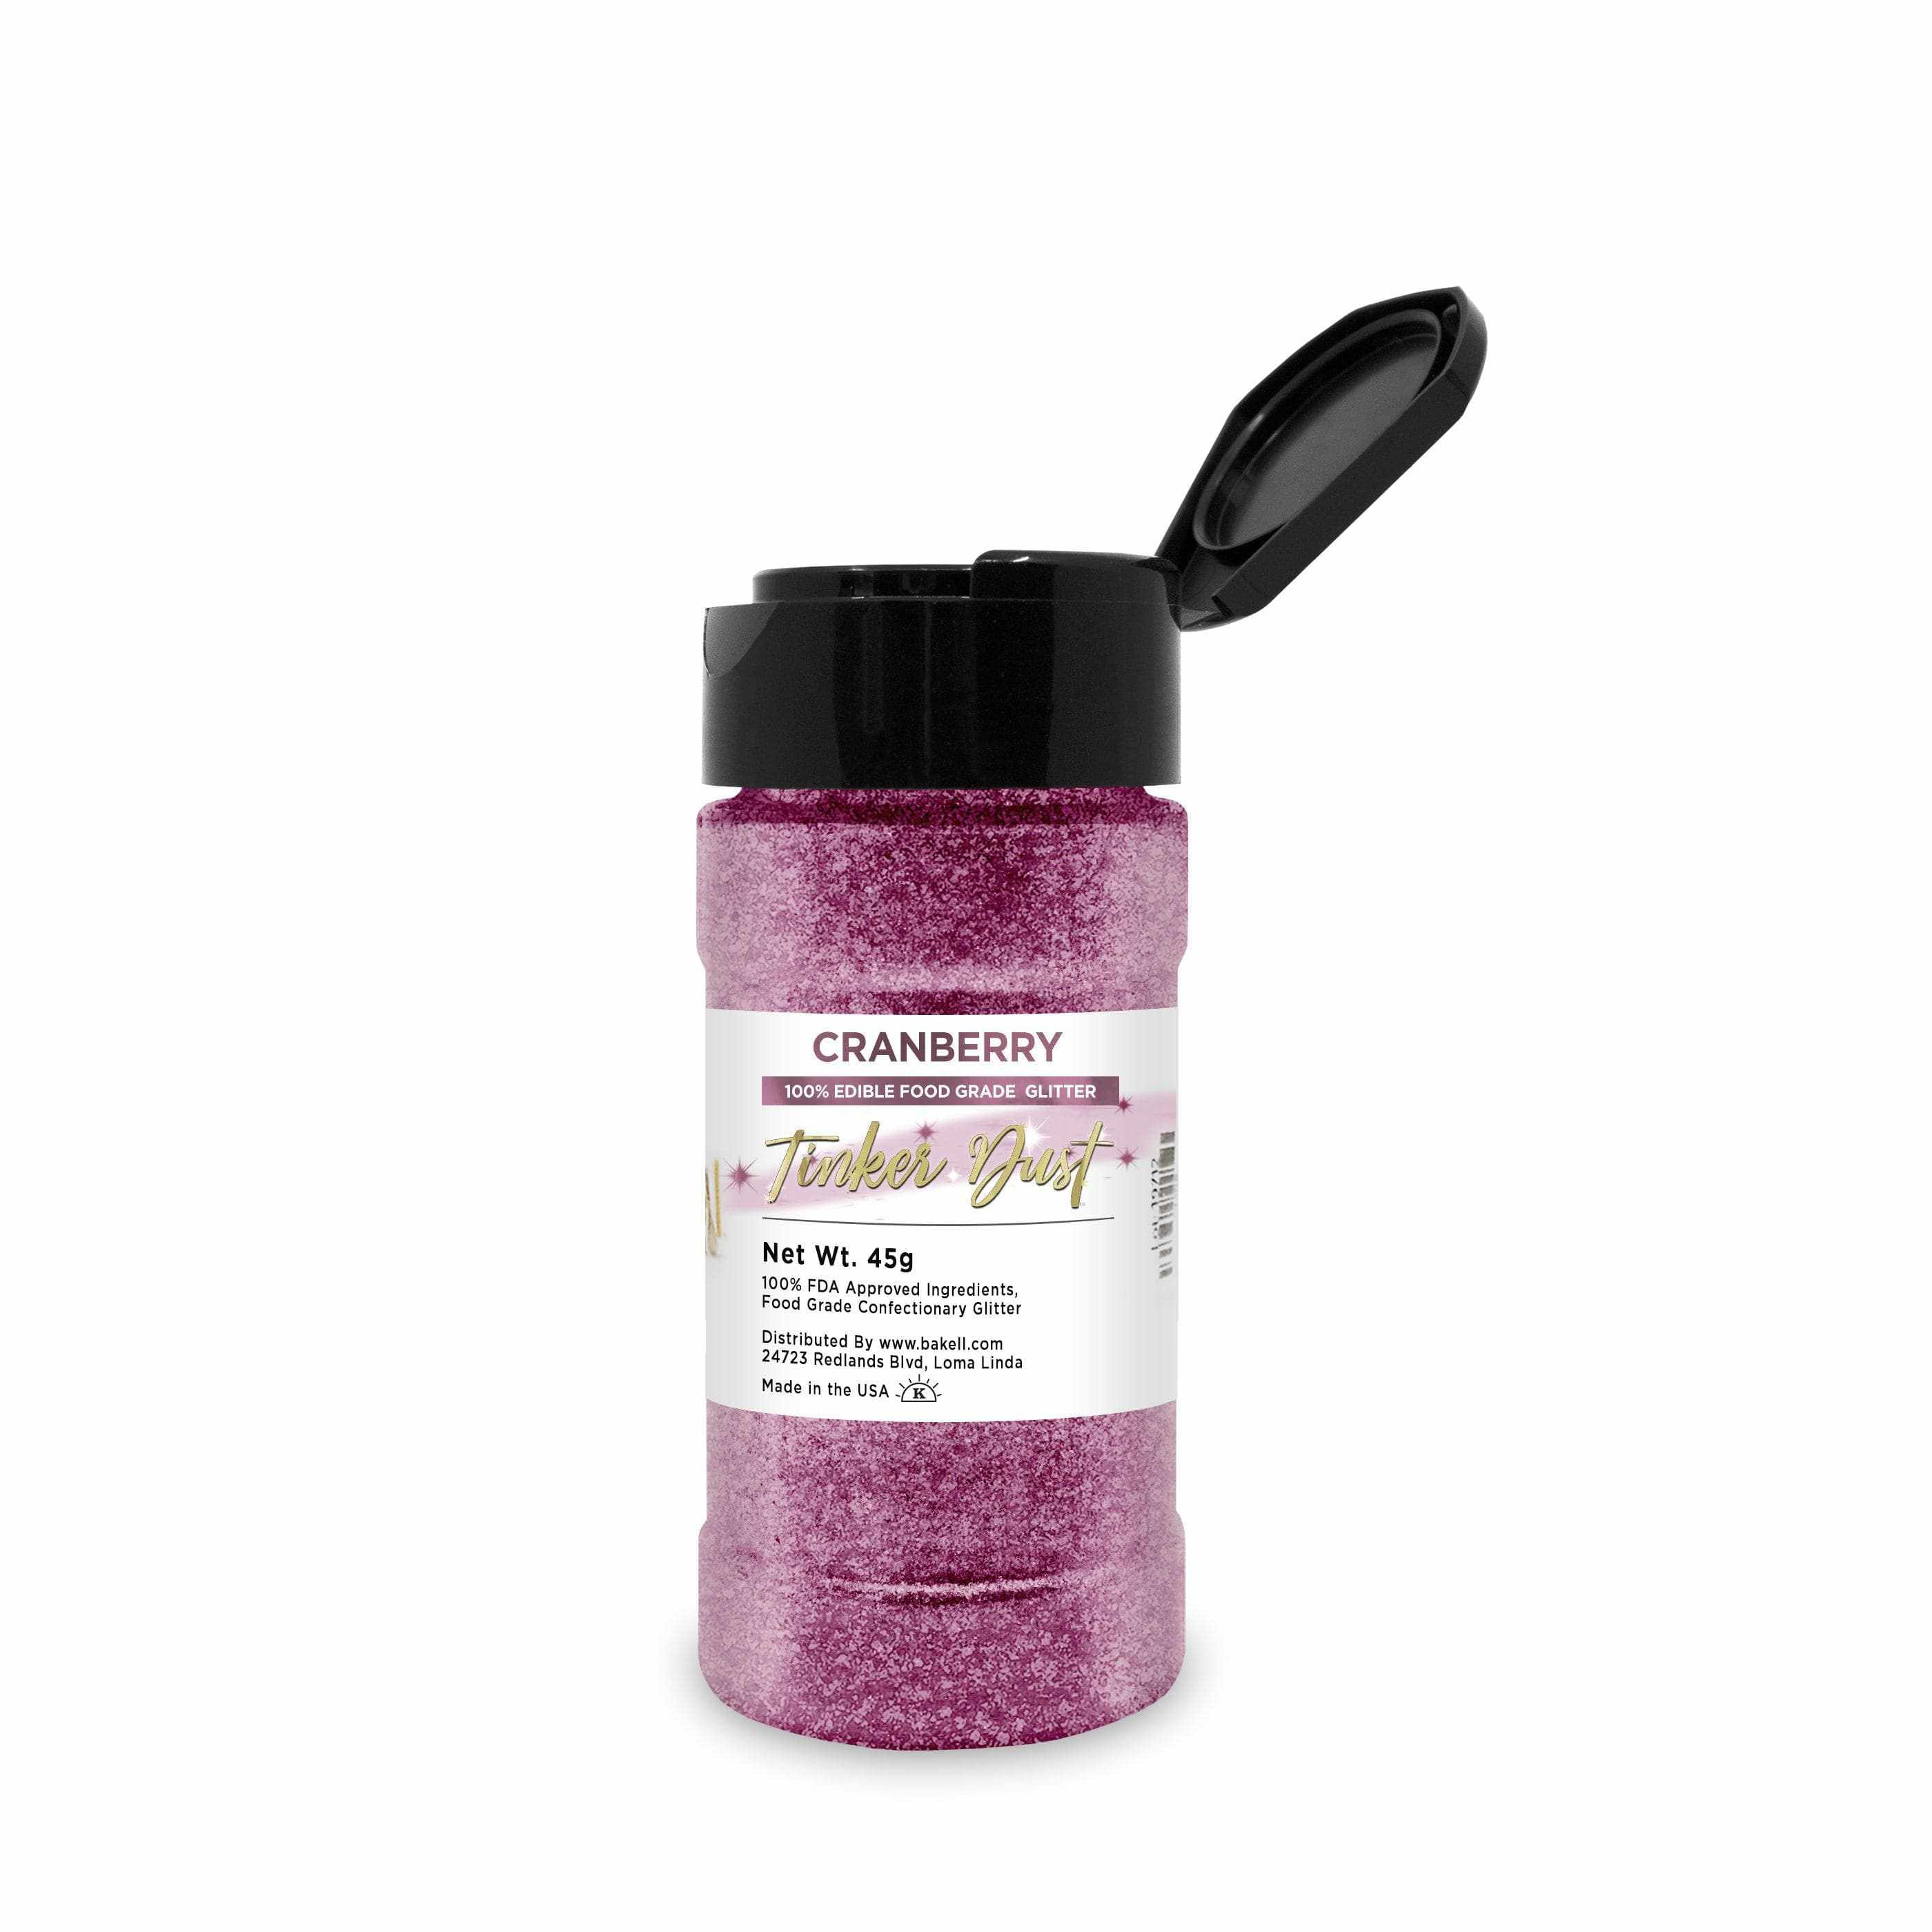 Cranberry Red Edible 5g Tinker Dust | Bakell